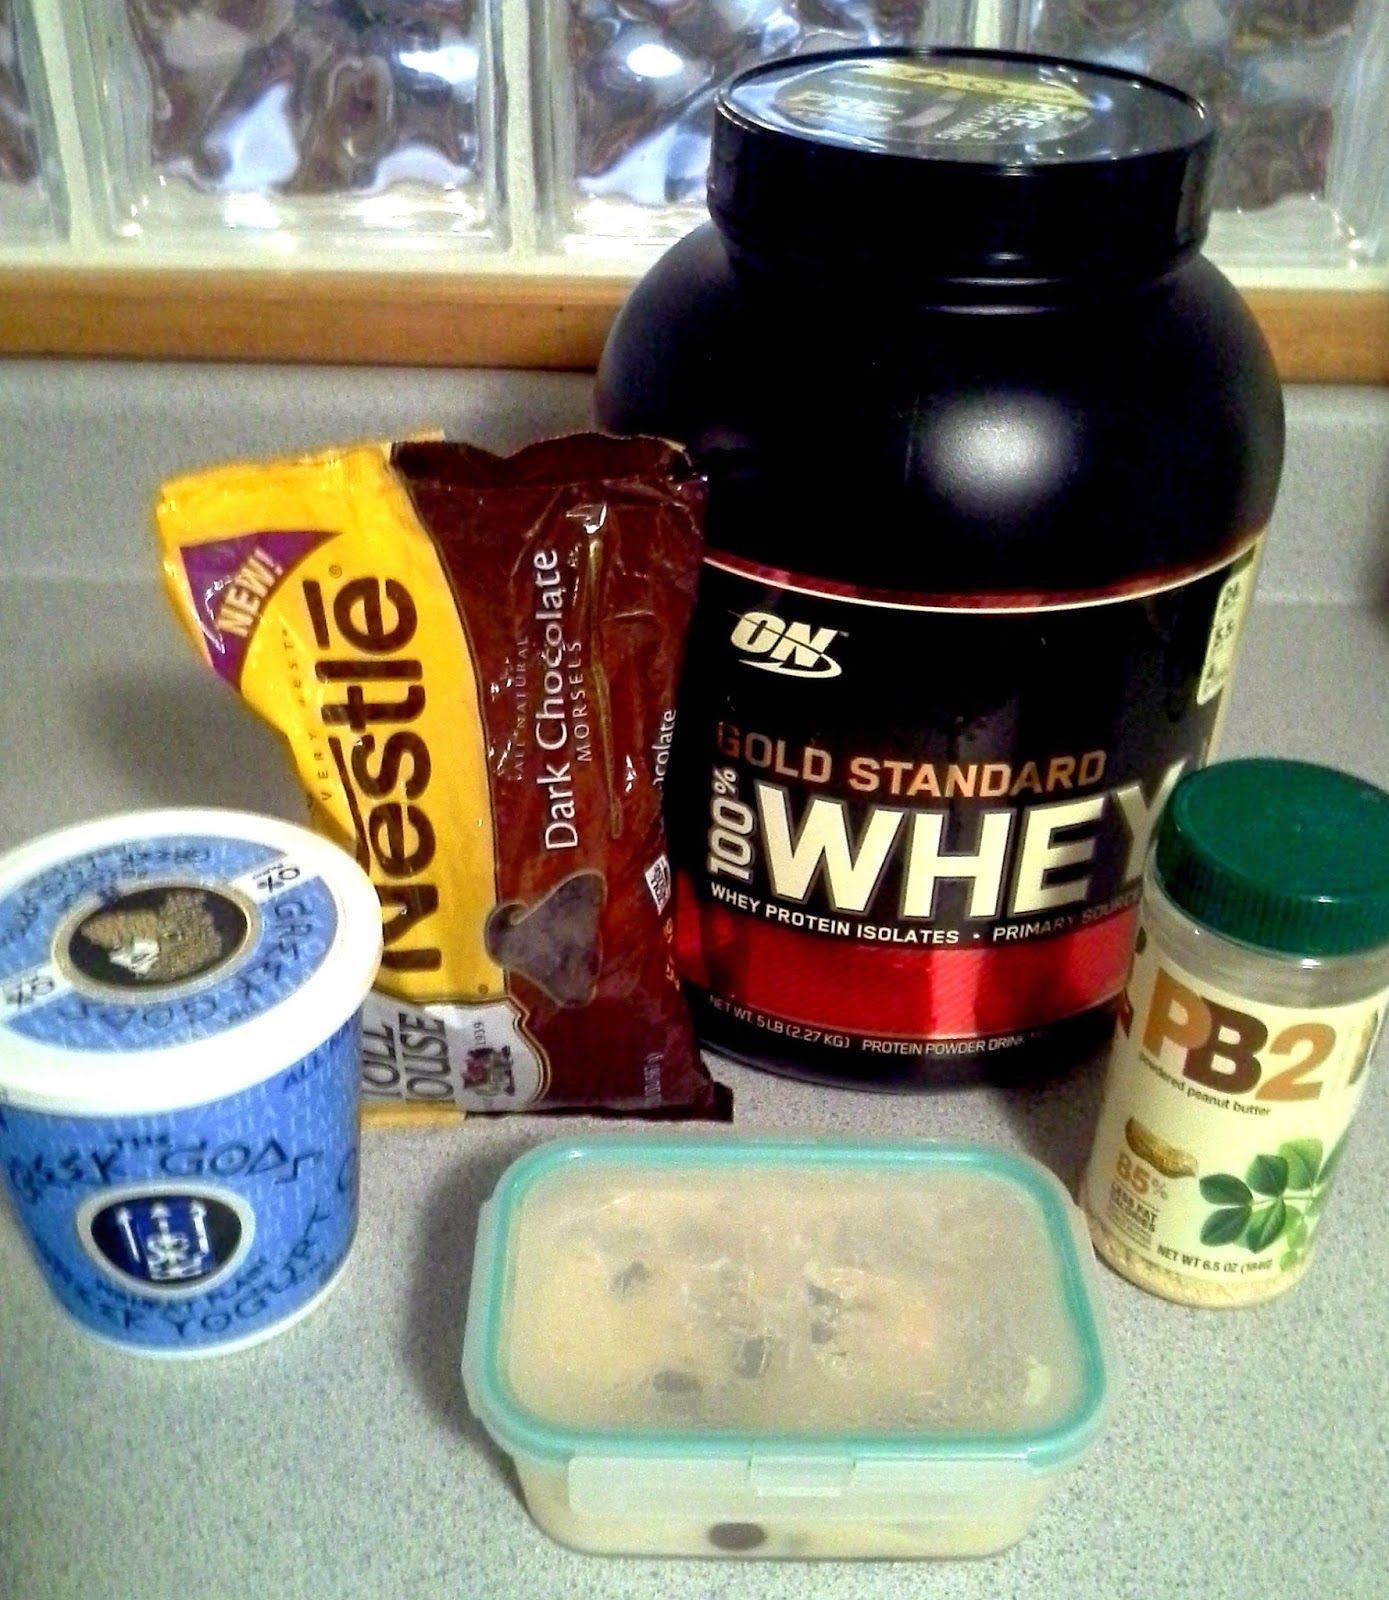 Square Two: High Protein “Cookie Do